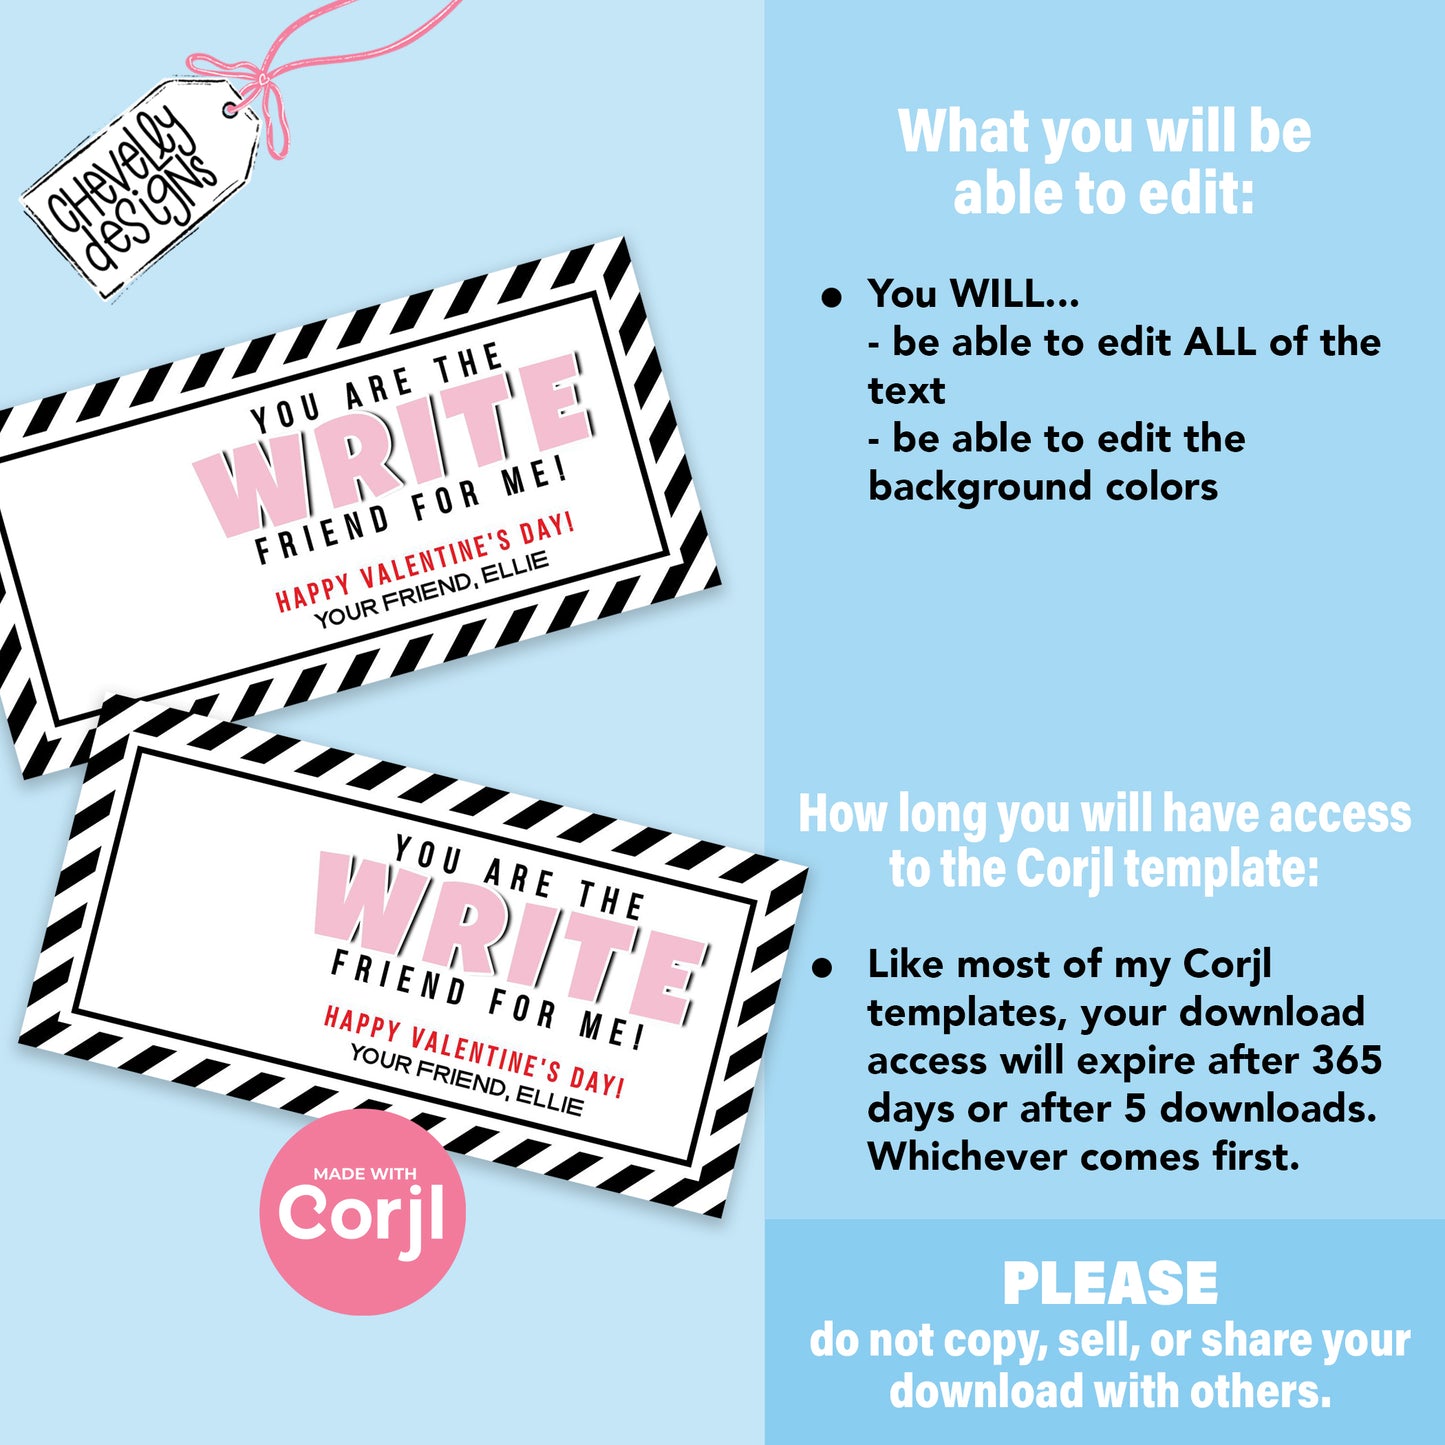 EDITABLE - You are the Write friend for me - Student Valentine Cards - Printable Digital File